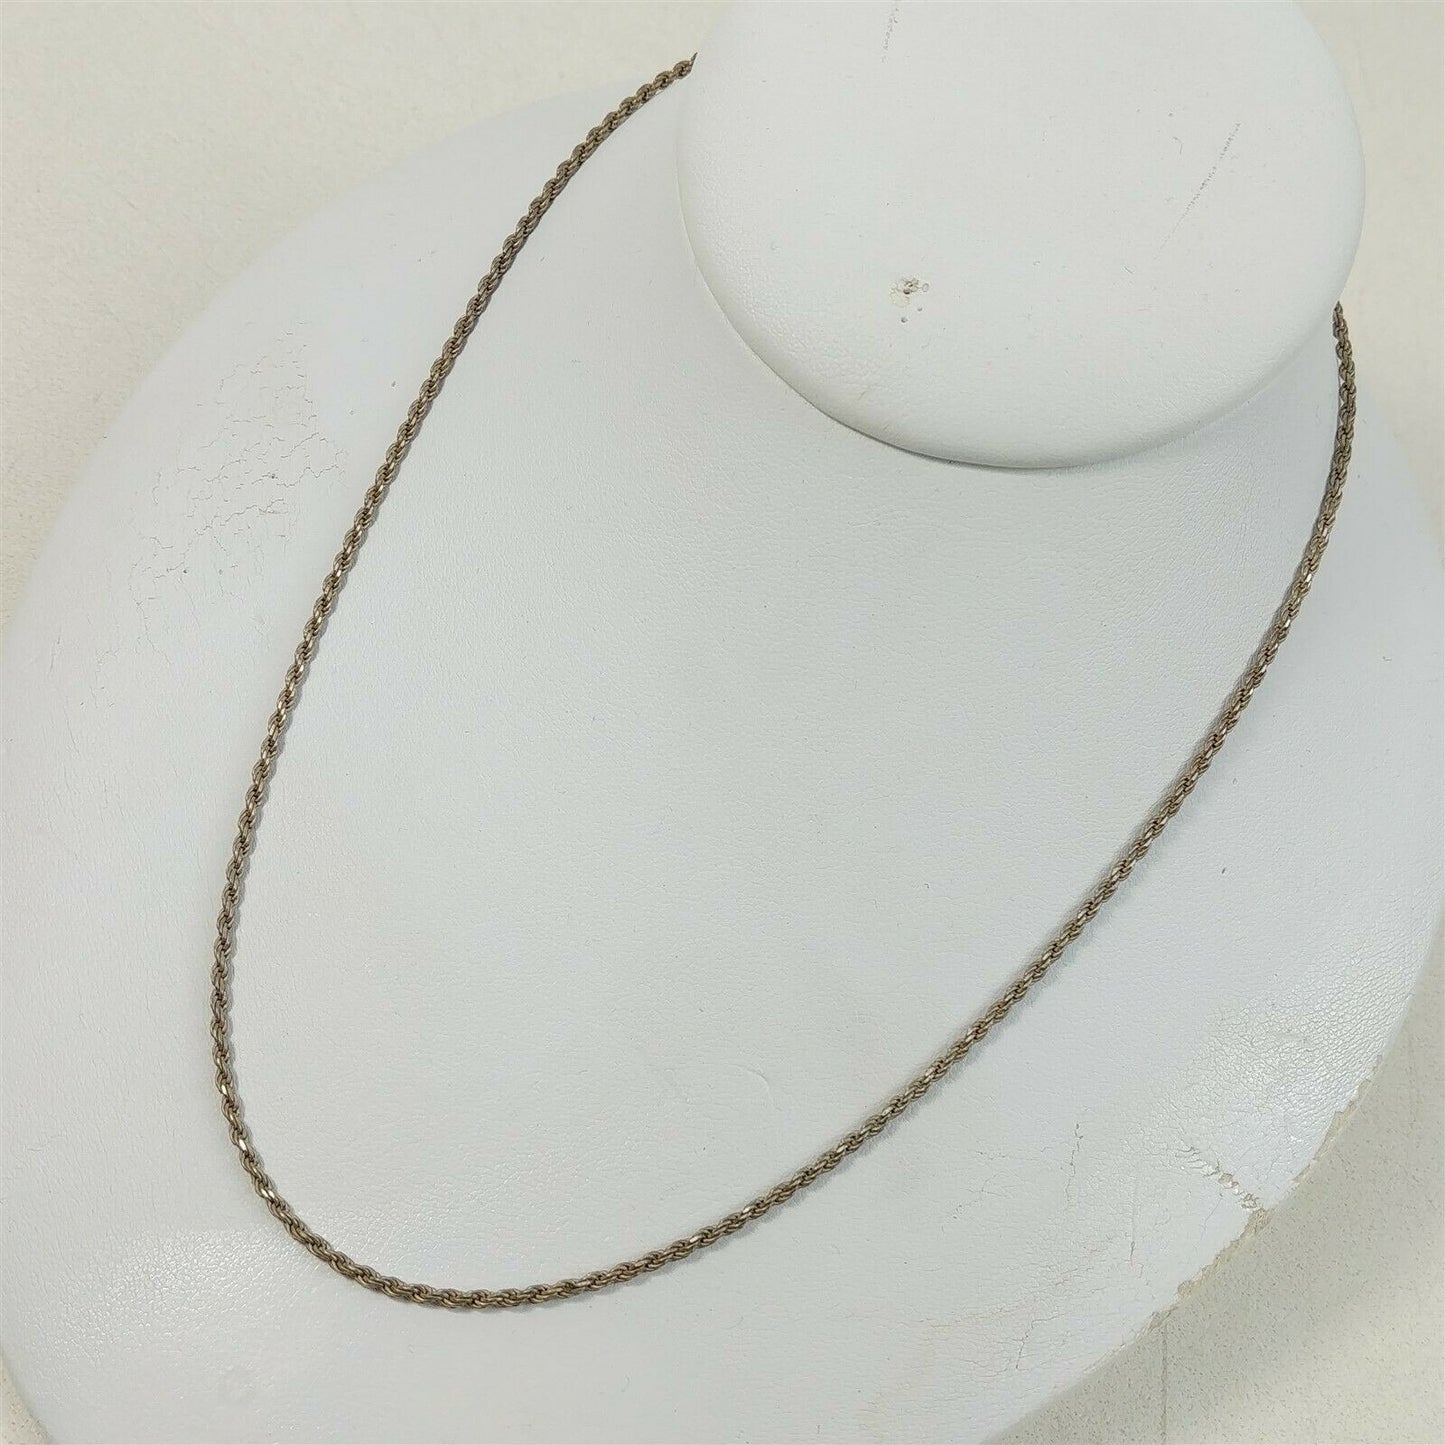 Italy 925 Sterling Silver Rope Chain Necklace 17" - 5.6g